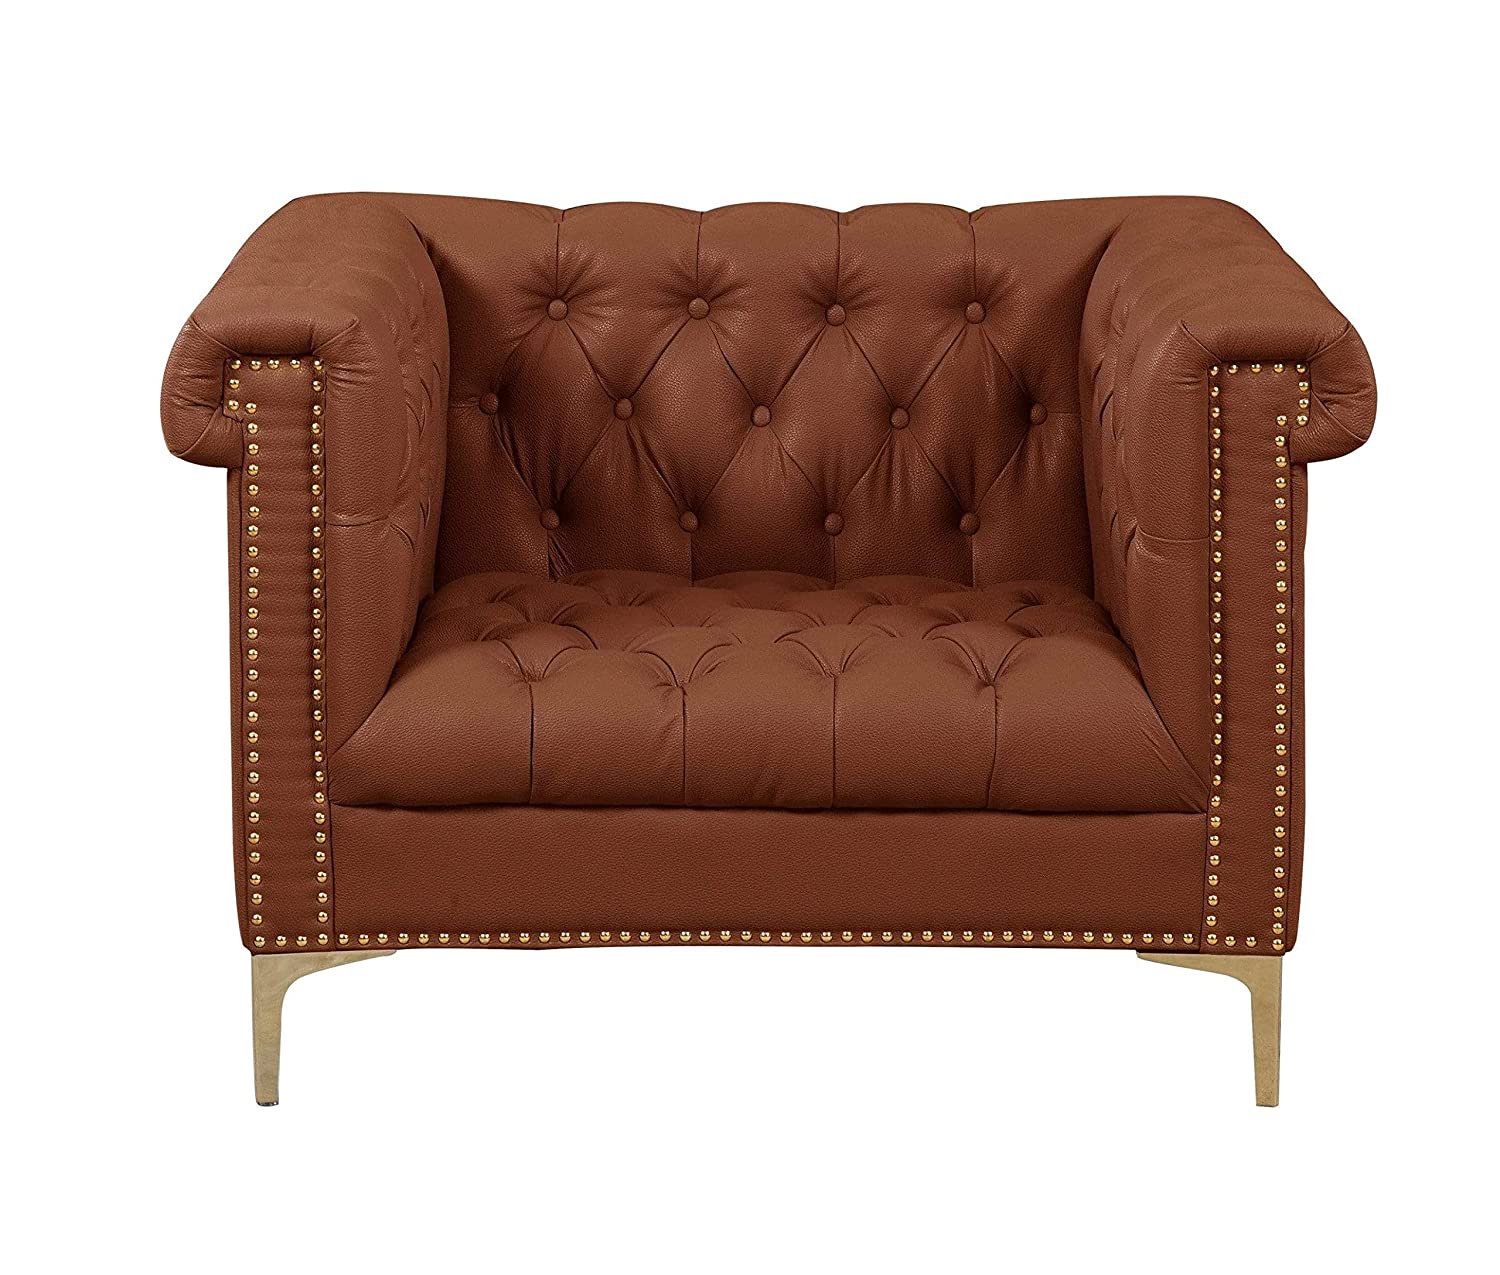 ES ESPINHO ESP140 Solid Sal Wood Velvet Button Tufted Sophisticated, Elegant, Durable & Comfortable 1 Seater Chesterfield Sofa (Single Seater), Green ES ESPINHO ESP153 Solid Sal Wood Leatherette Button Tufted Sophisticated, Elegant, Durable & Comfortable 1 Seater Chesterfield Sofa (Single Seater)